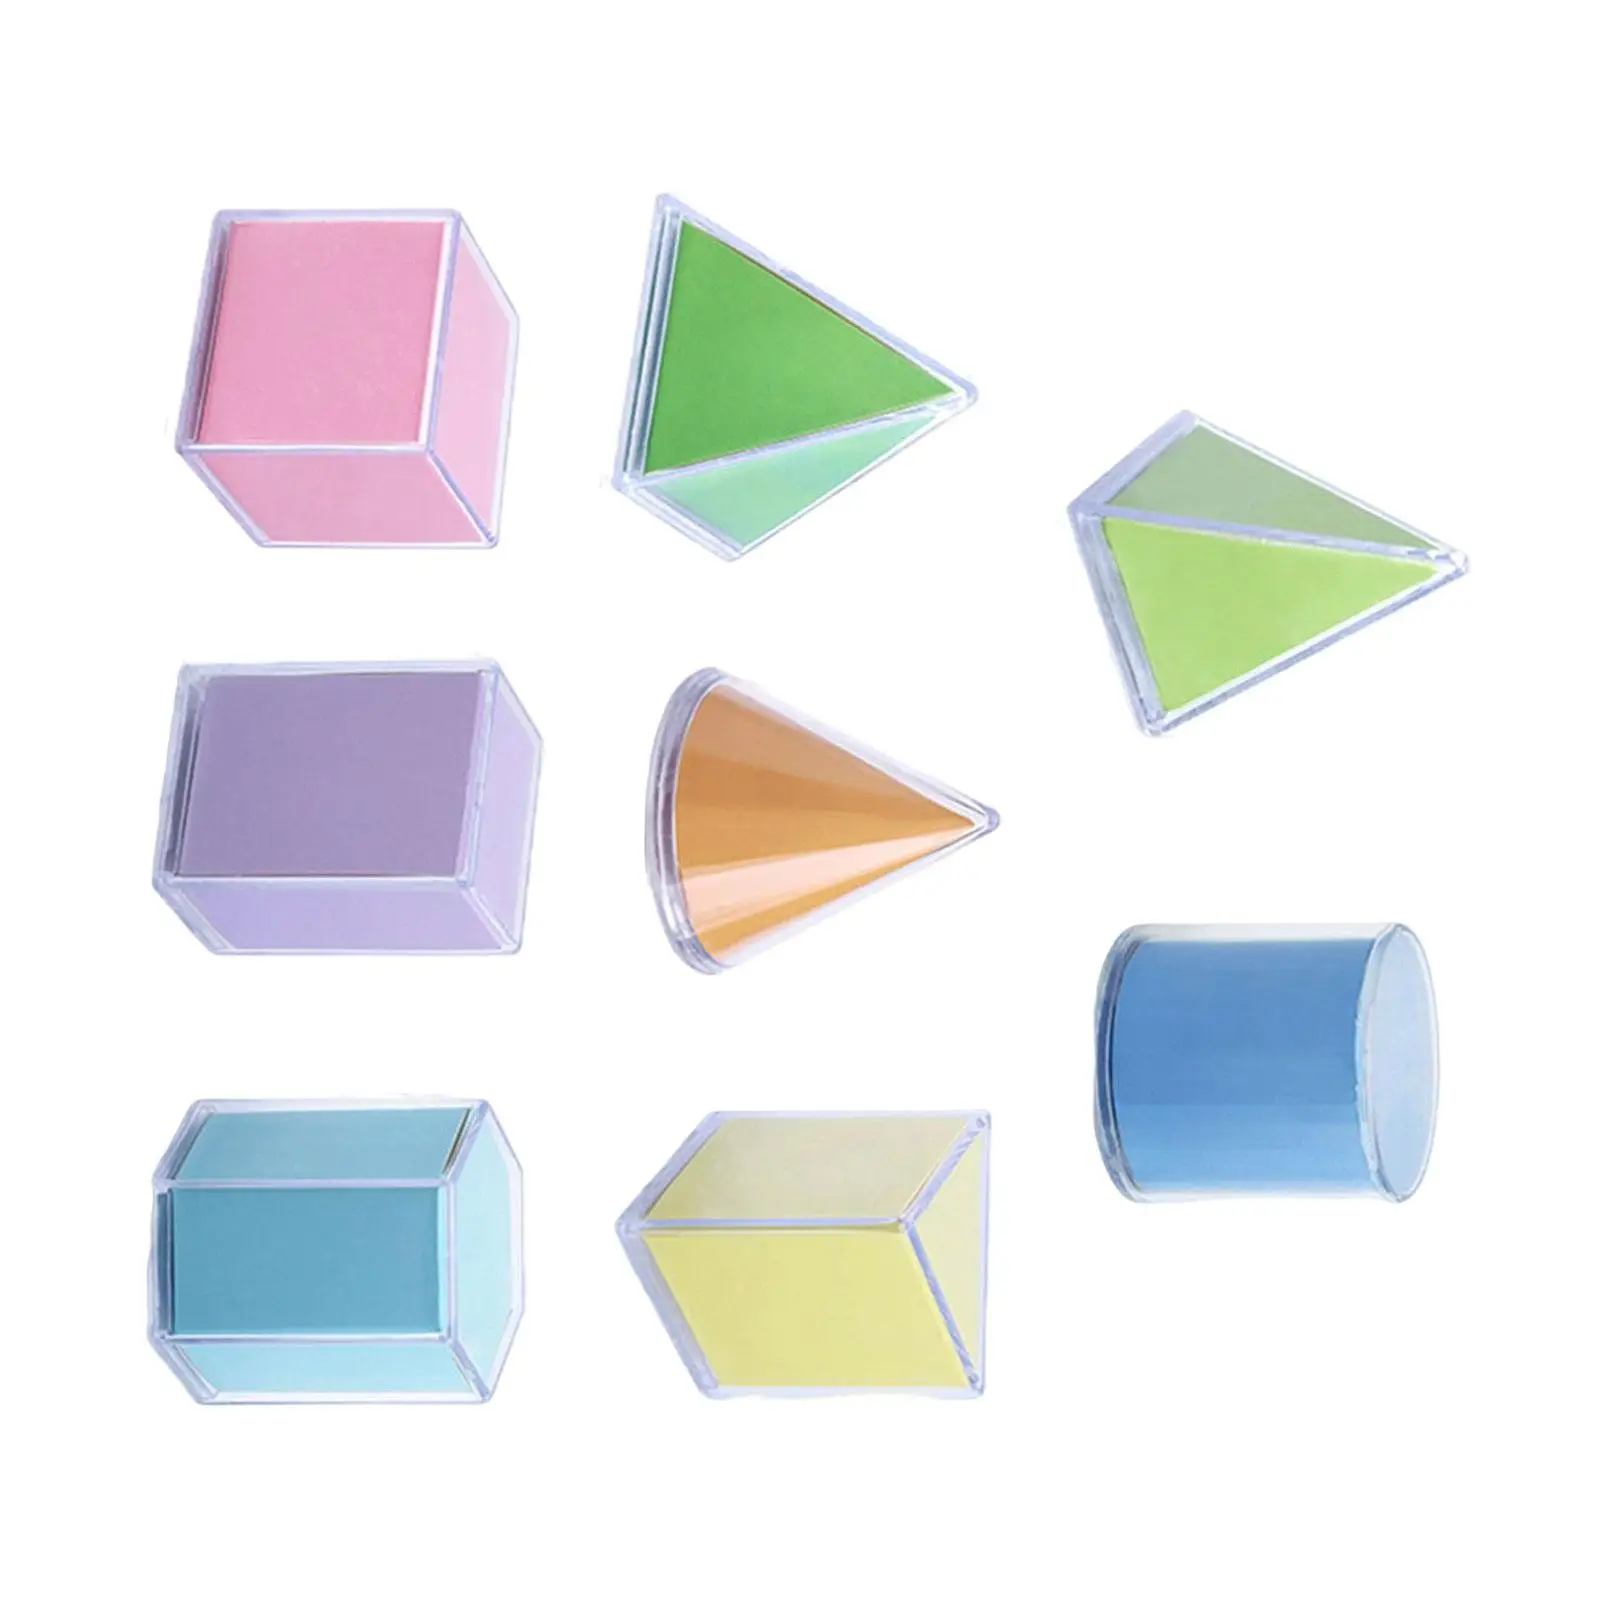 8 Pieces Transparent Geometric Shapes Blocks Stacking Montessori Toys for Kids Babies